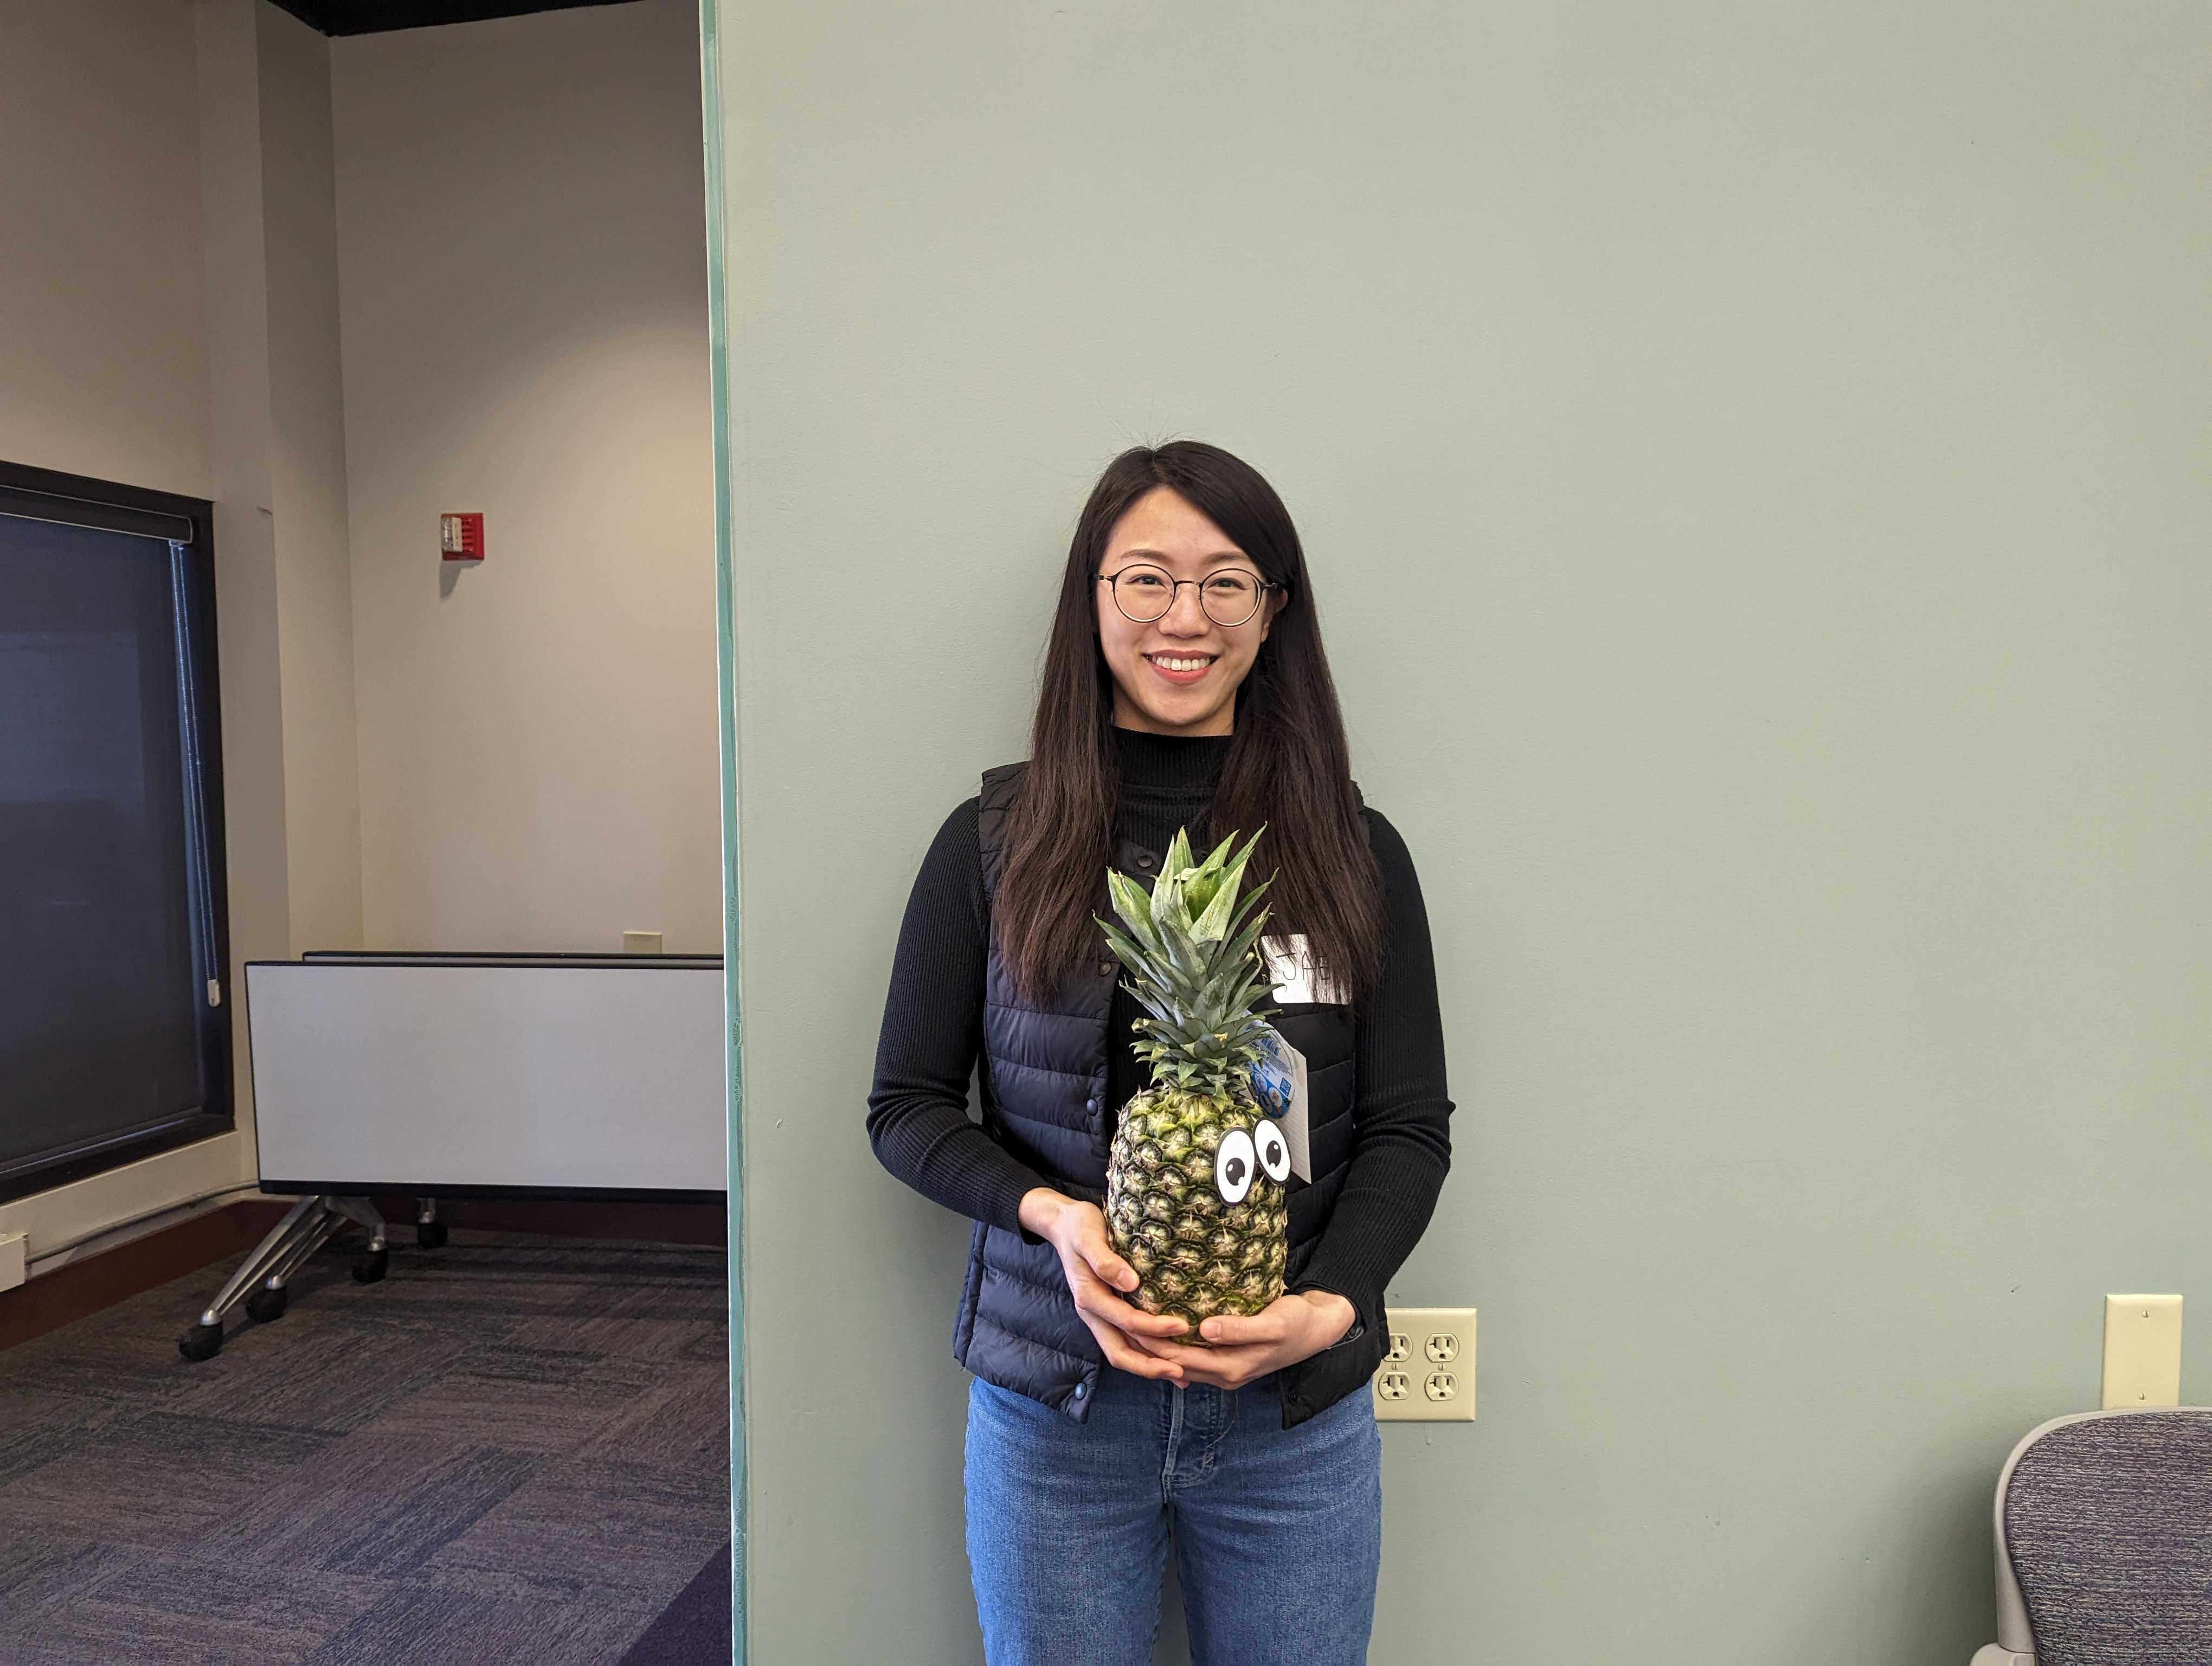 Faculty member Jaey Kim poses with a pineapple to signify graduation from ATLS.